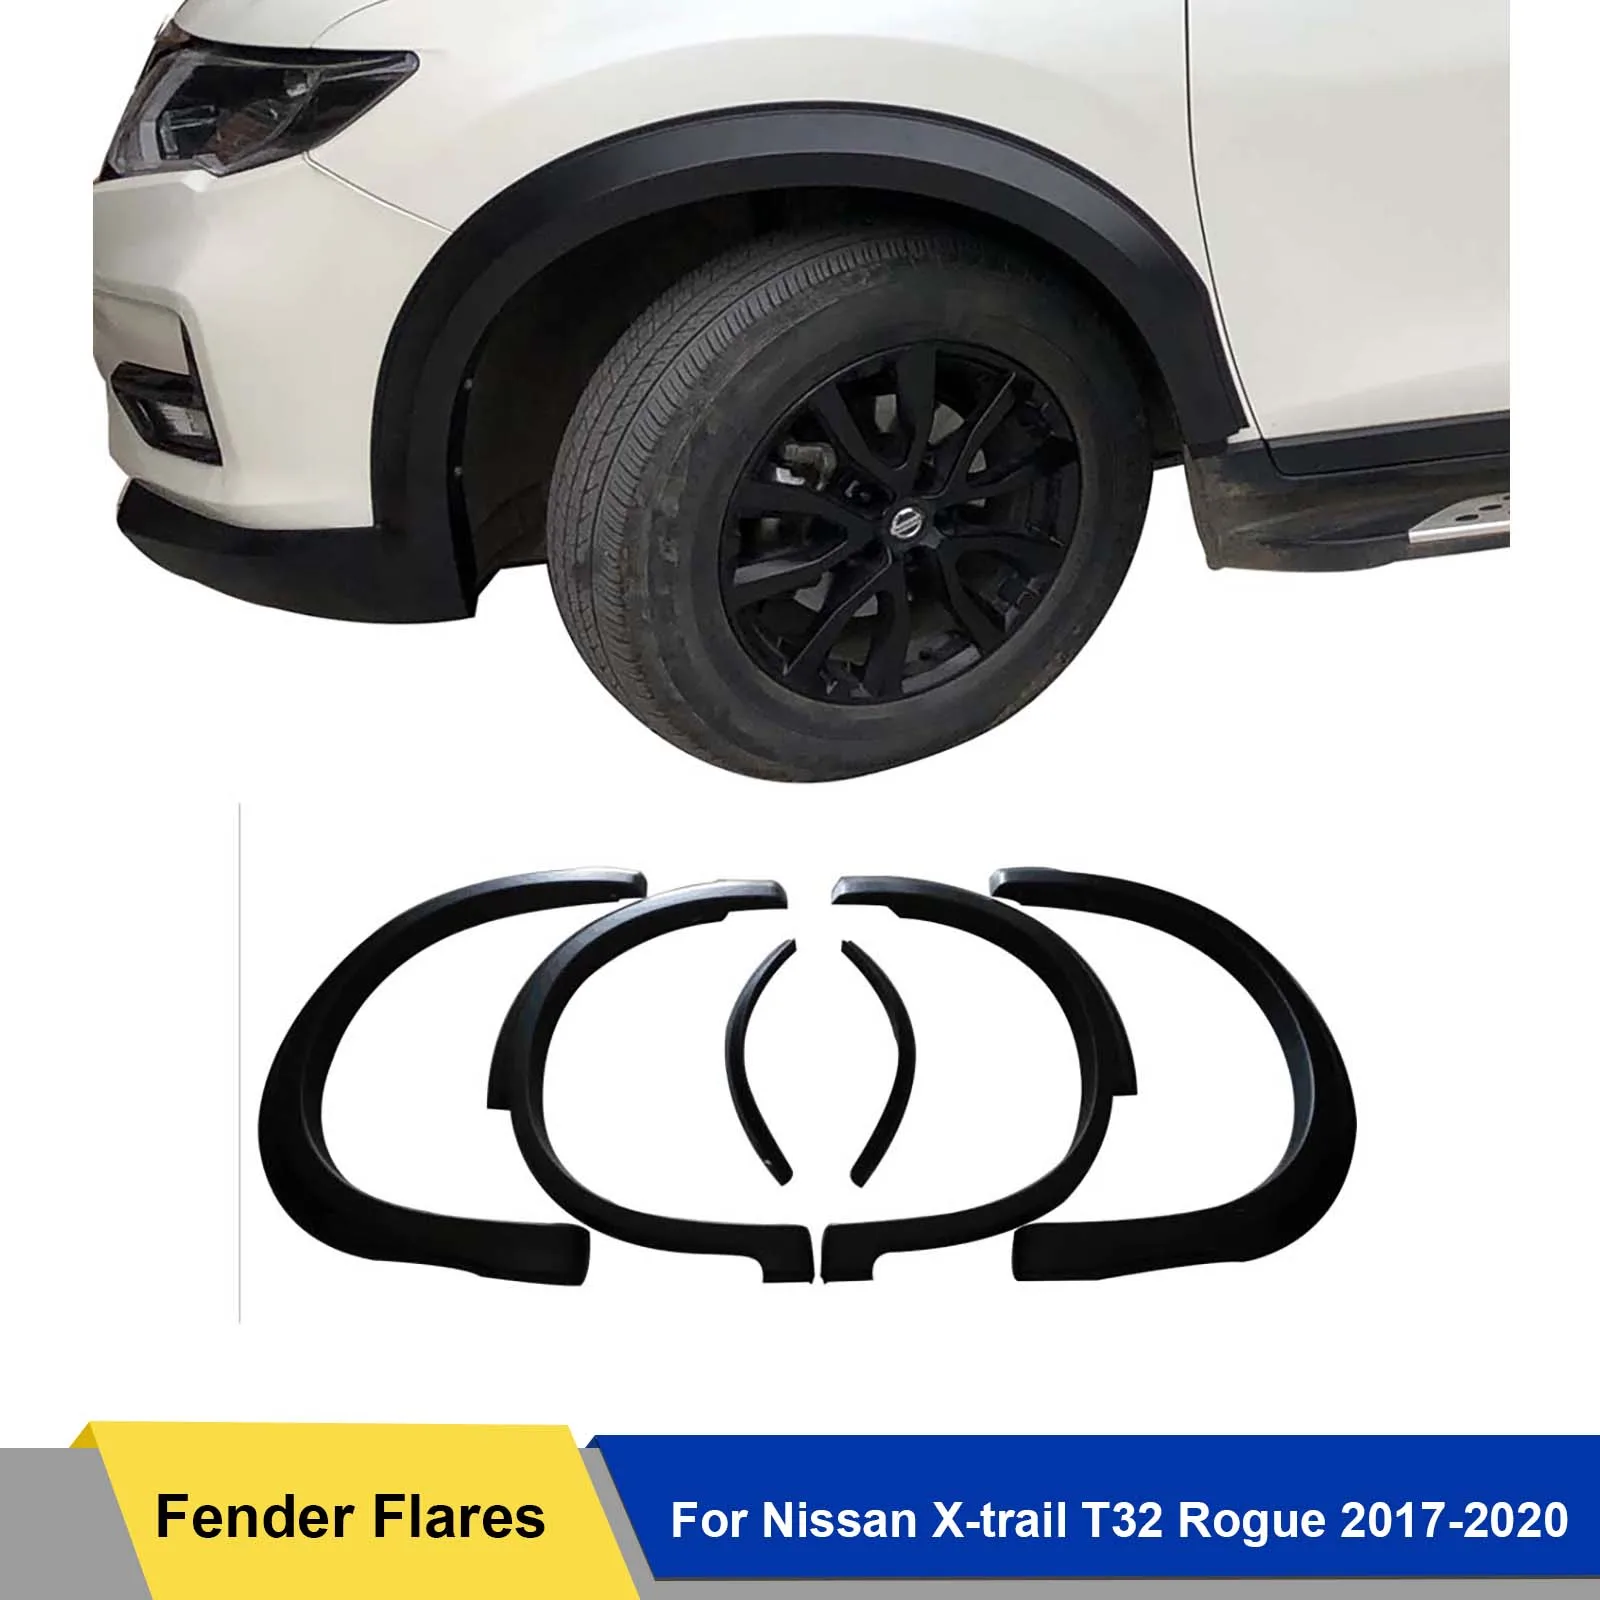 

Fender Flares Wheel Arch Raptor Style Guard For Nissan X-trail T32 Rogue 2017 2018 2019 2020 Matte Black 8pcs Guard Cover